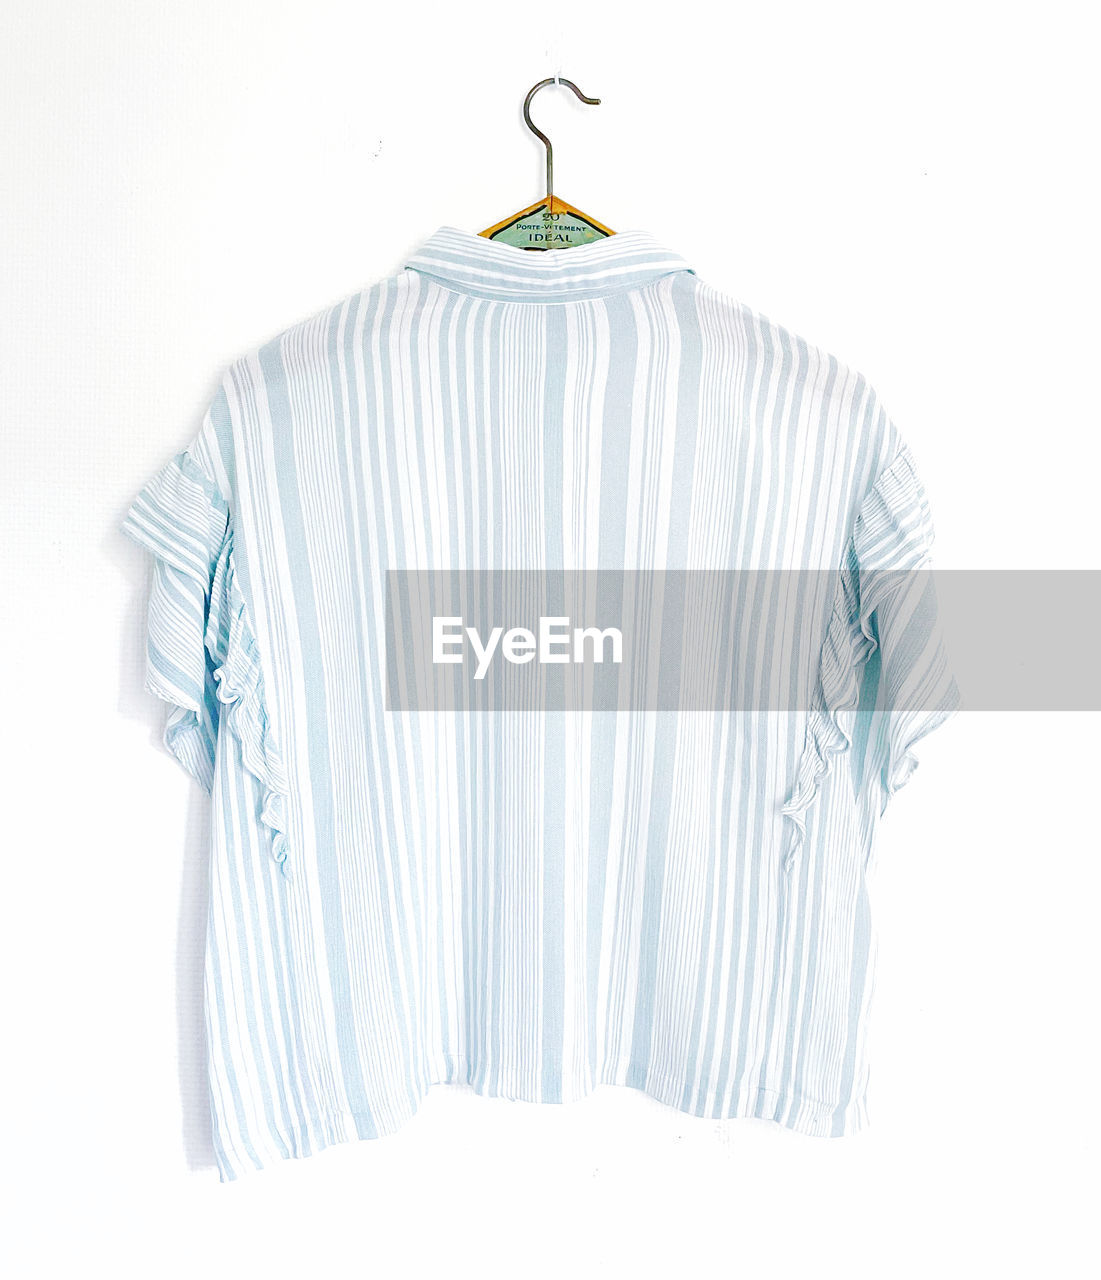 coathanger, sleeve, hanging, clothing, white background, white, studio shot, t-shirt, indoors, cut out, no people, striped, azure, aqua, casual clothing, fashion, copy space, button down shirt, shirt